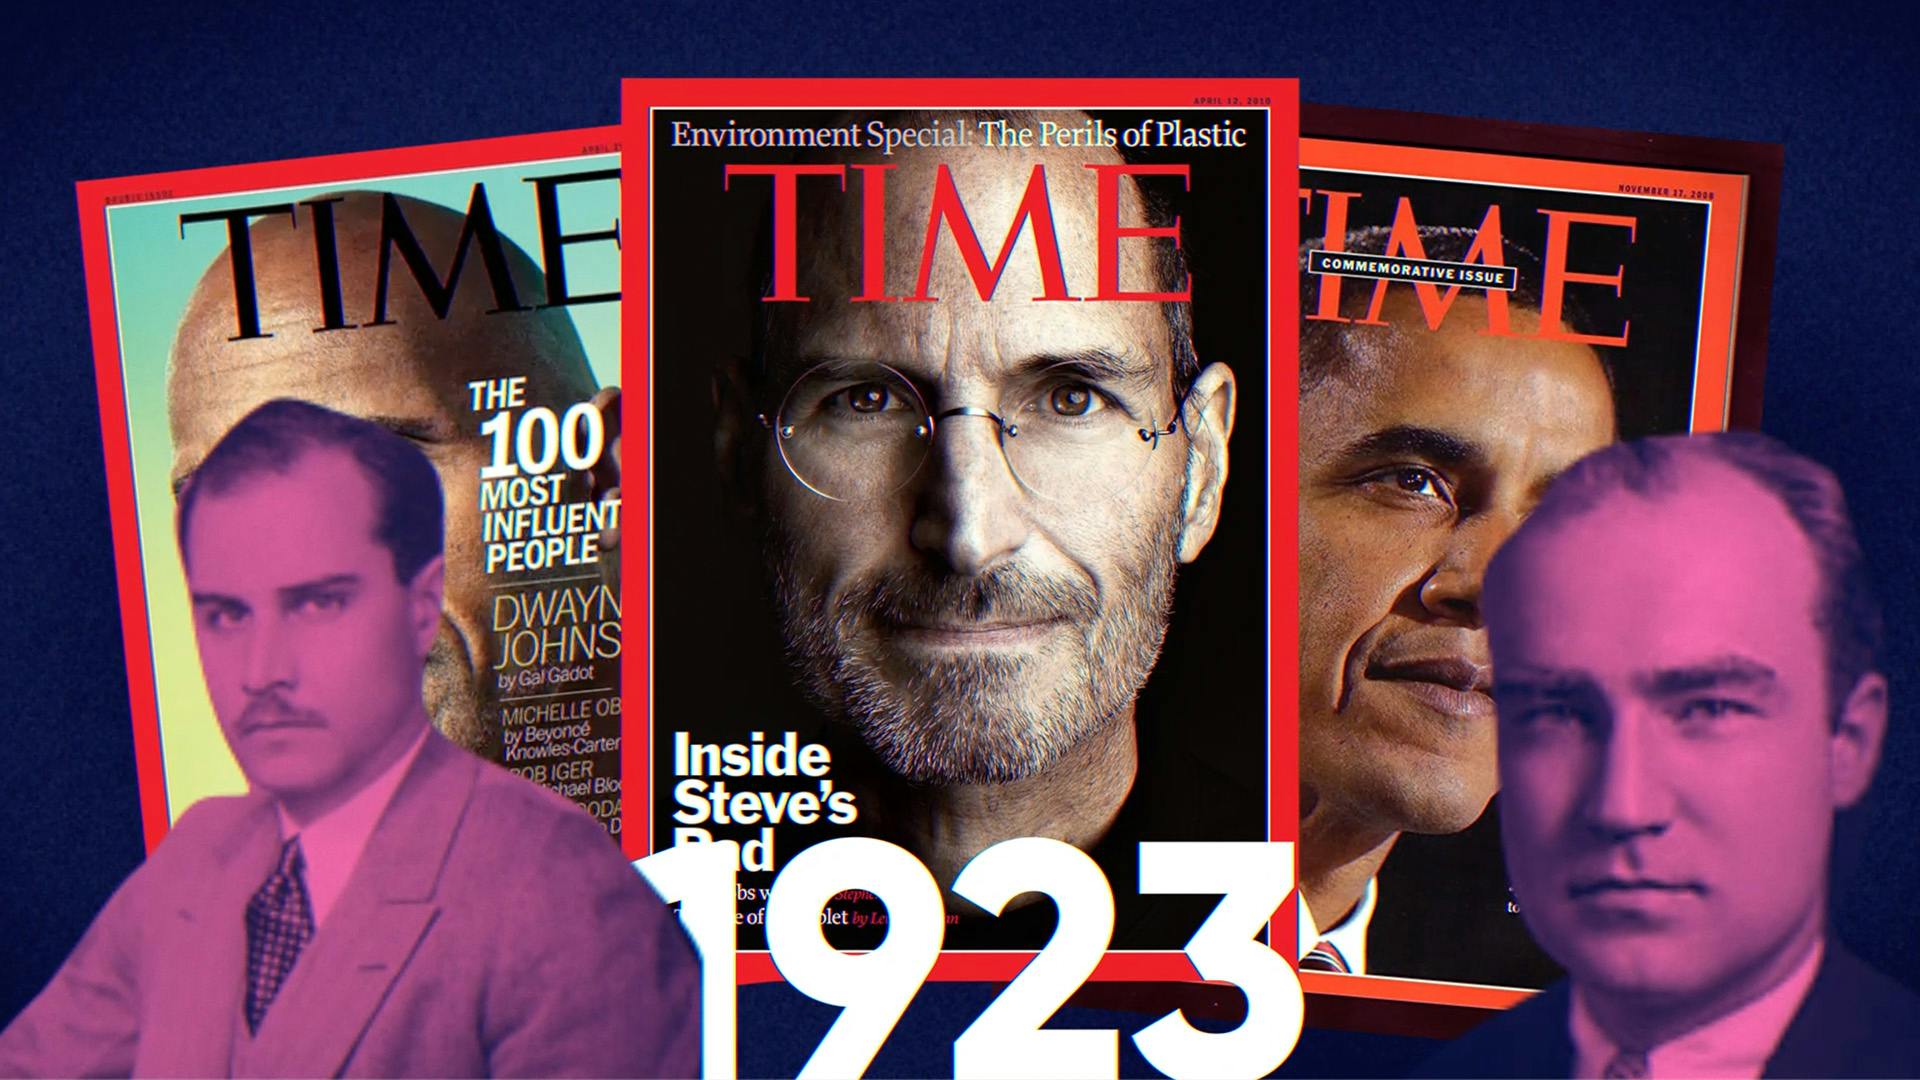 Time founders Briton Hadden and Henry Luce in front of 3 covers of Time magazine featuring The Rock, Steve Jobs, and Barack Obama.